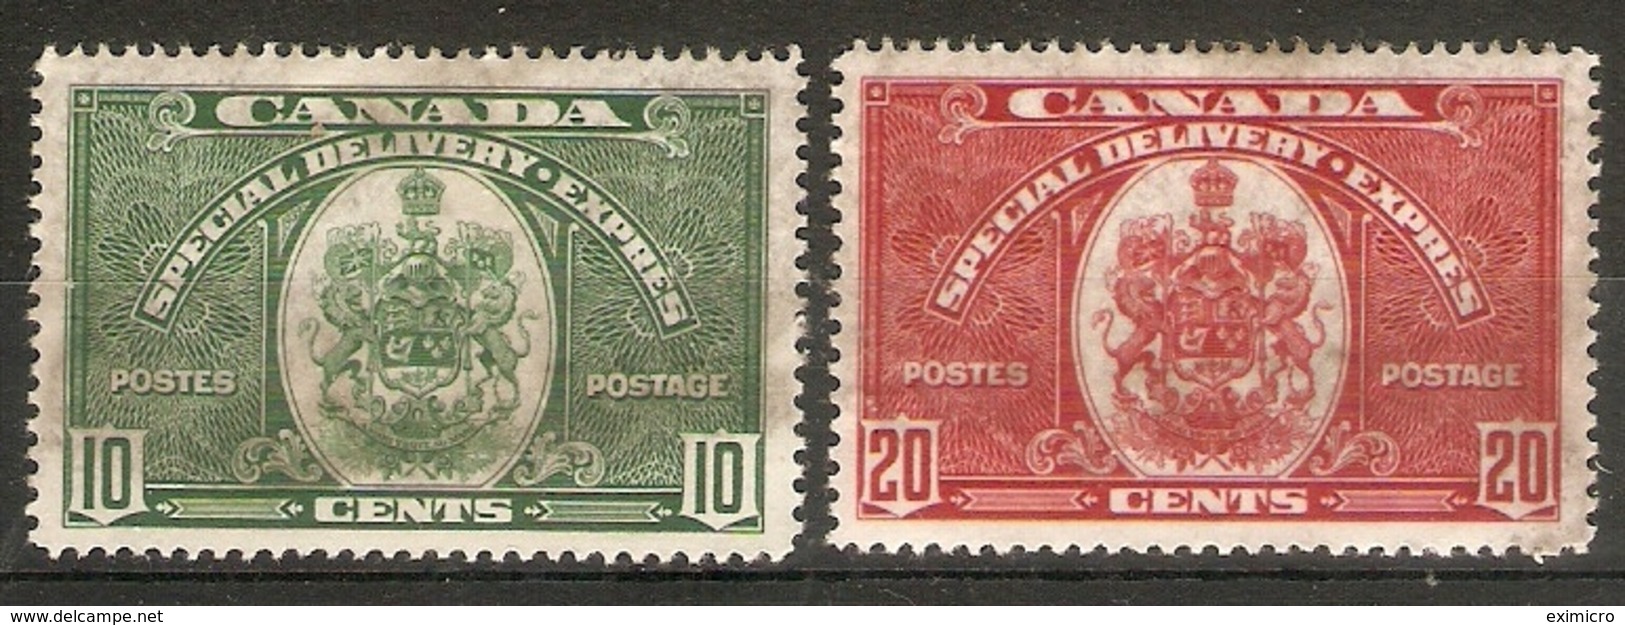 CANADA 1938 - 1939 SPECIAL DELIVERY SET SG S9/S10  MOUNTED MINT Cat £66 - Exprès